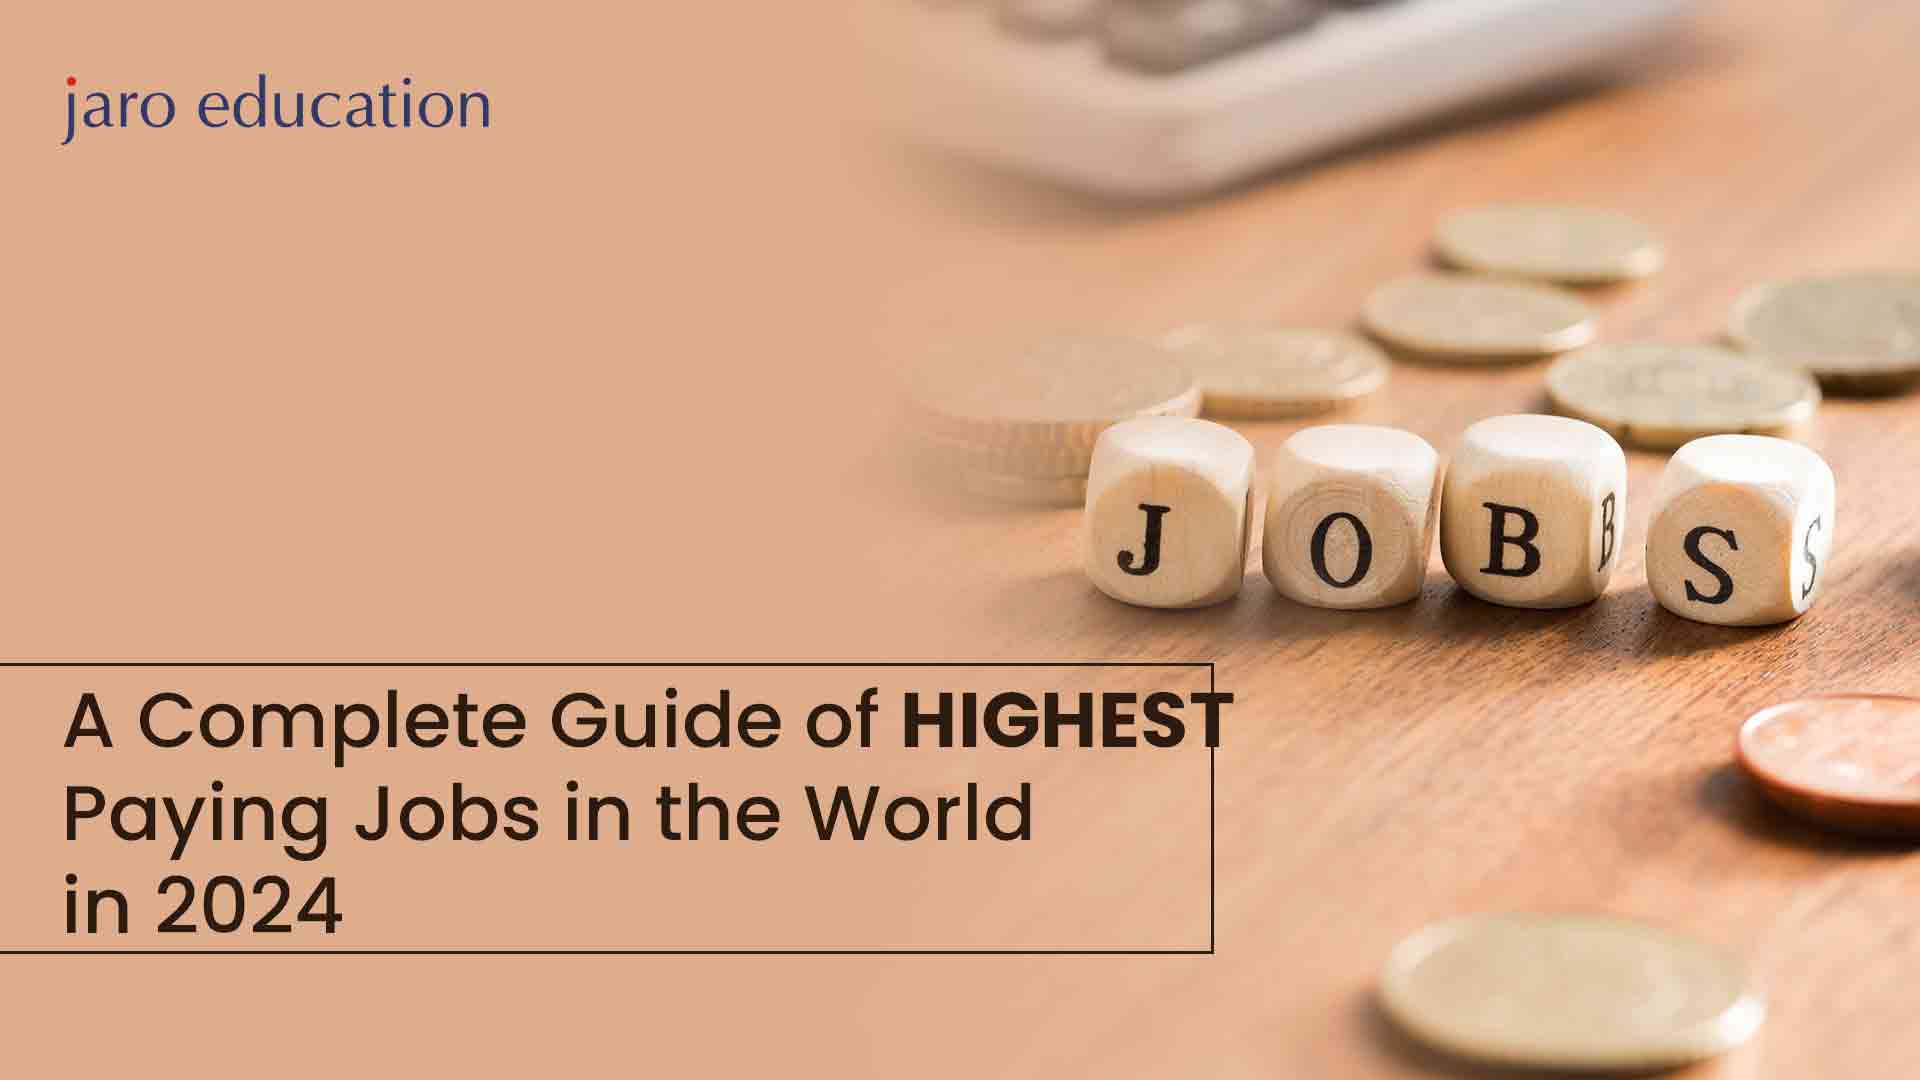 A Complete Guide of Highest Paying Jobs in the World in 2024